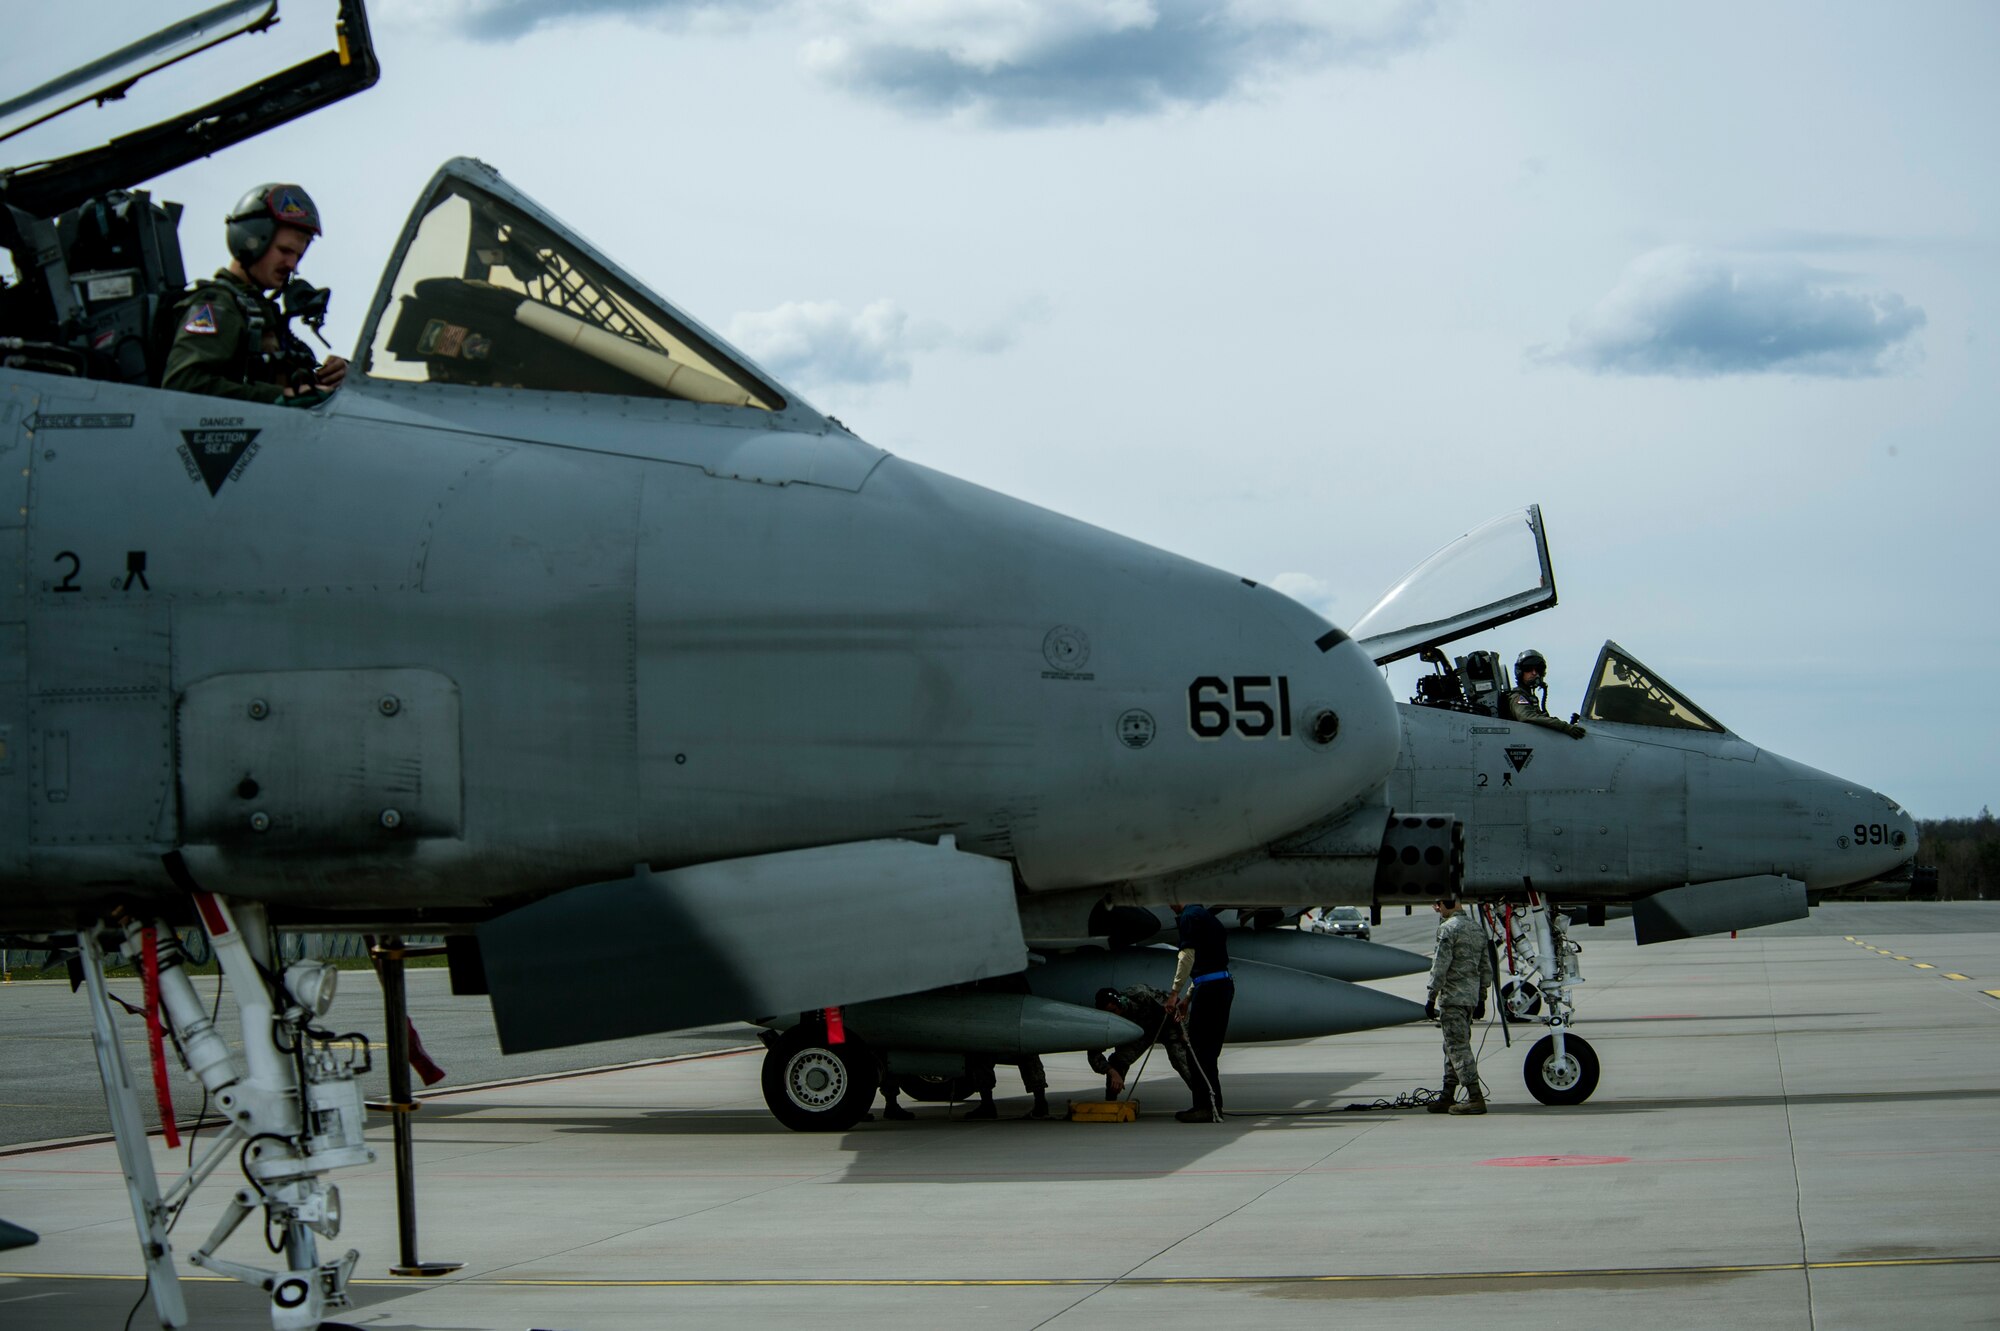 U.S. Air Force A-10 Thunderbolt II attack aircraft pilots wait to climb out of their aircraft after landing at Ämari Air Base, Estonia, May 1, 2015. About 66 Airmen and support equipment from the 355th Fighter Wing at Davis-Monthan Air Force Base, Arizona, and the 52nd Fighter Wing at Spangdahlem Air Base, Germany, will support the deployment in Estonia. (U.S. Air Force photo by Senior Airman Rusty Frank/Released)